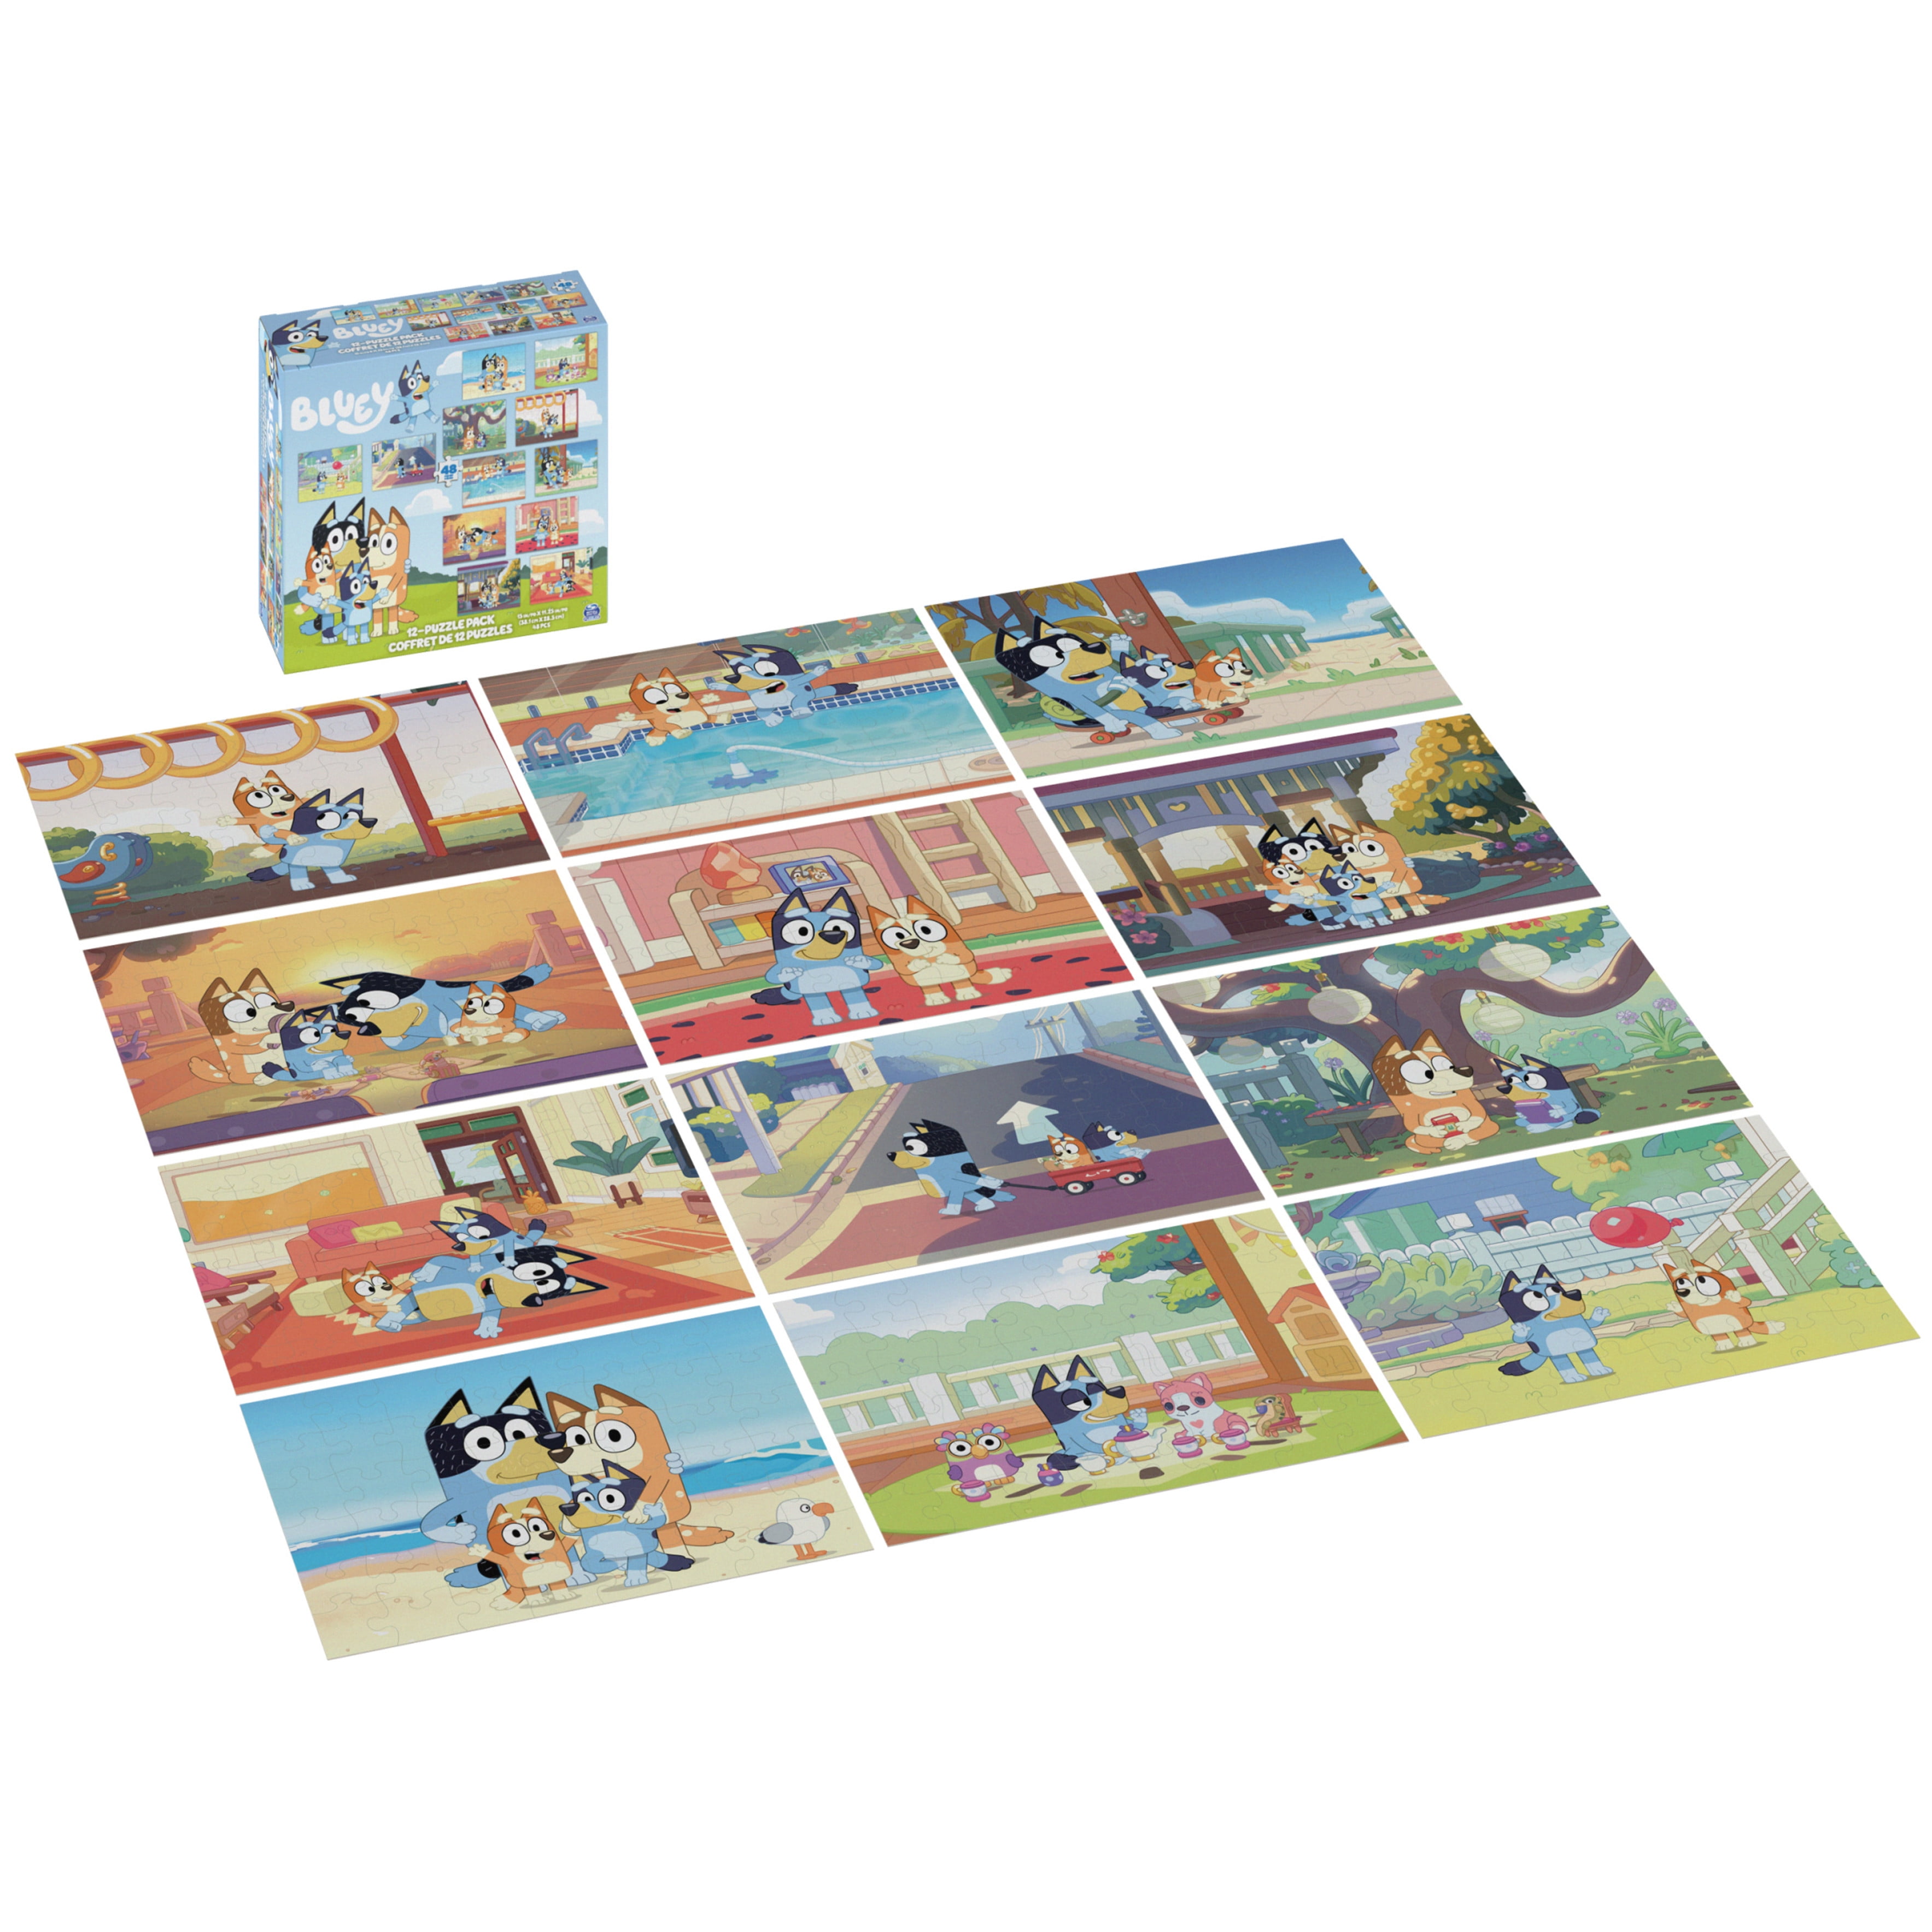 Bluey 12-Pack of Jigsaw Puzzles for Families, Kids, and